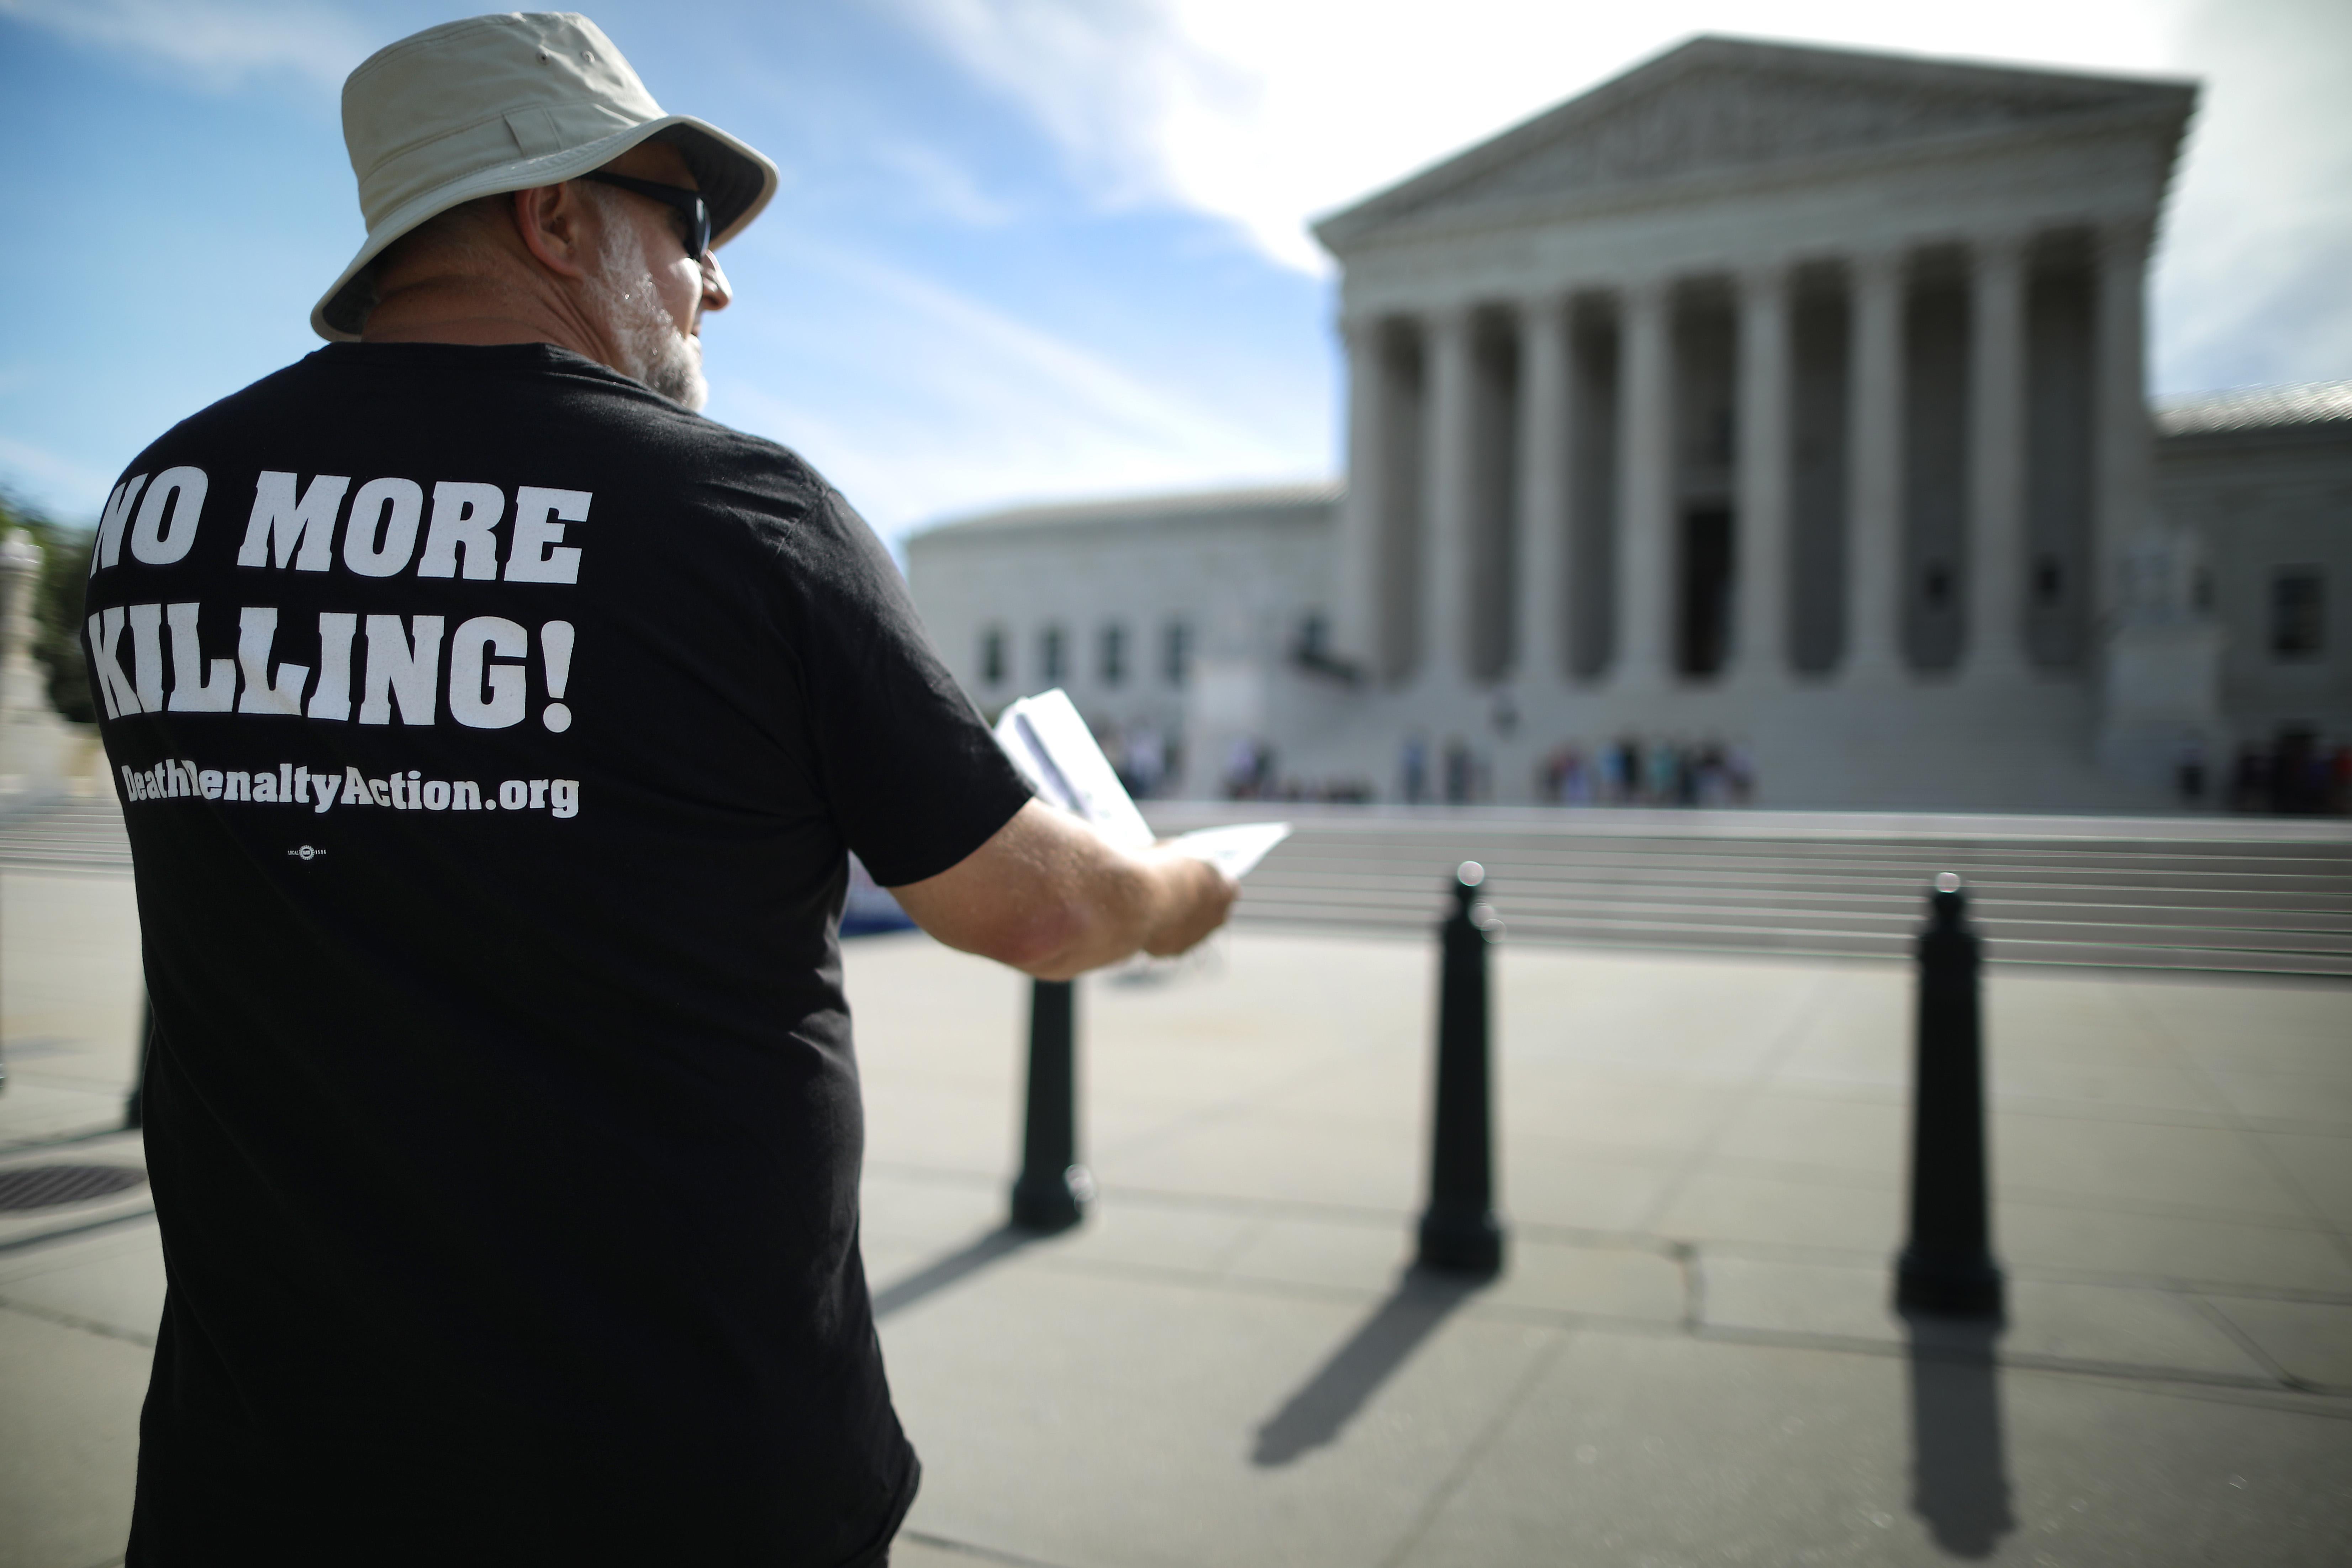 A protester in front of the Supreme Court wears a shirt that says "No More Killing!"